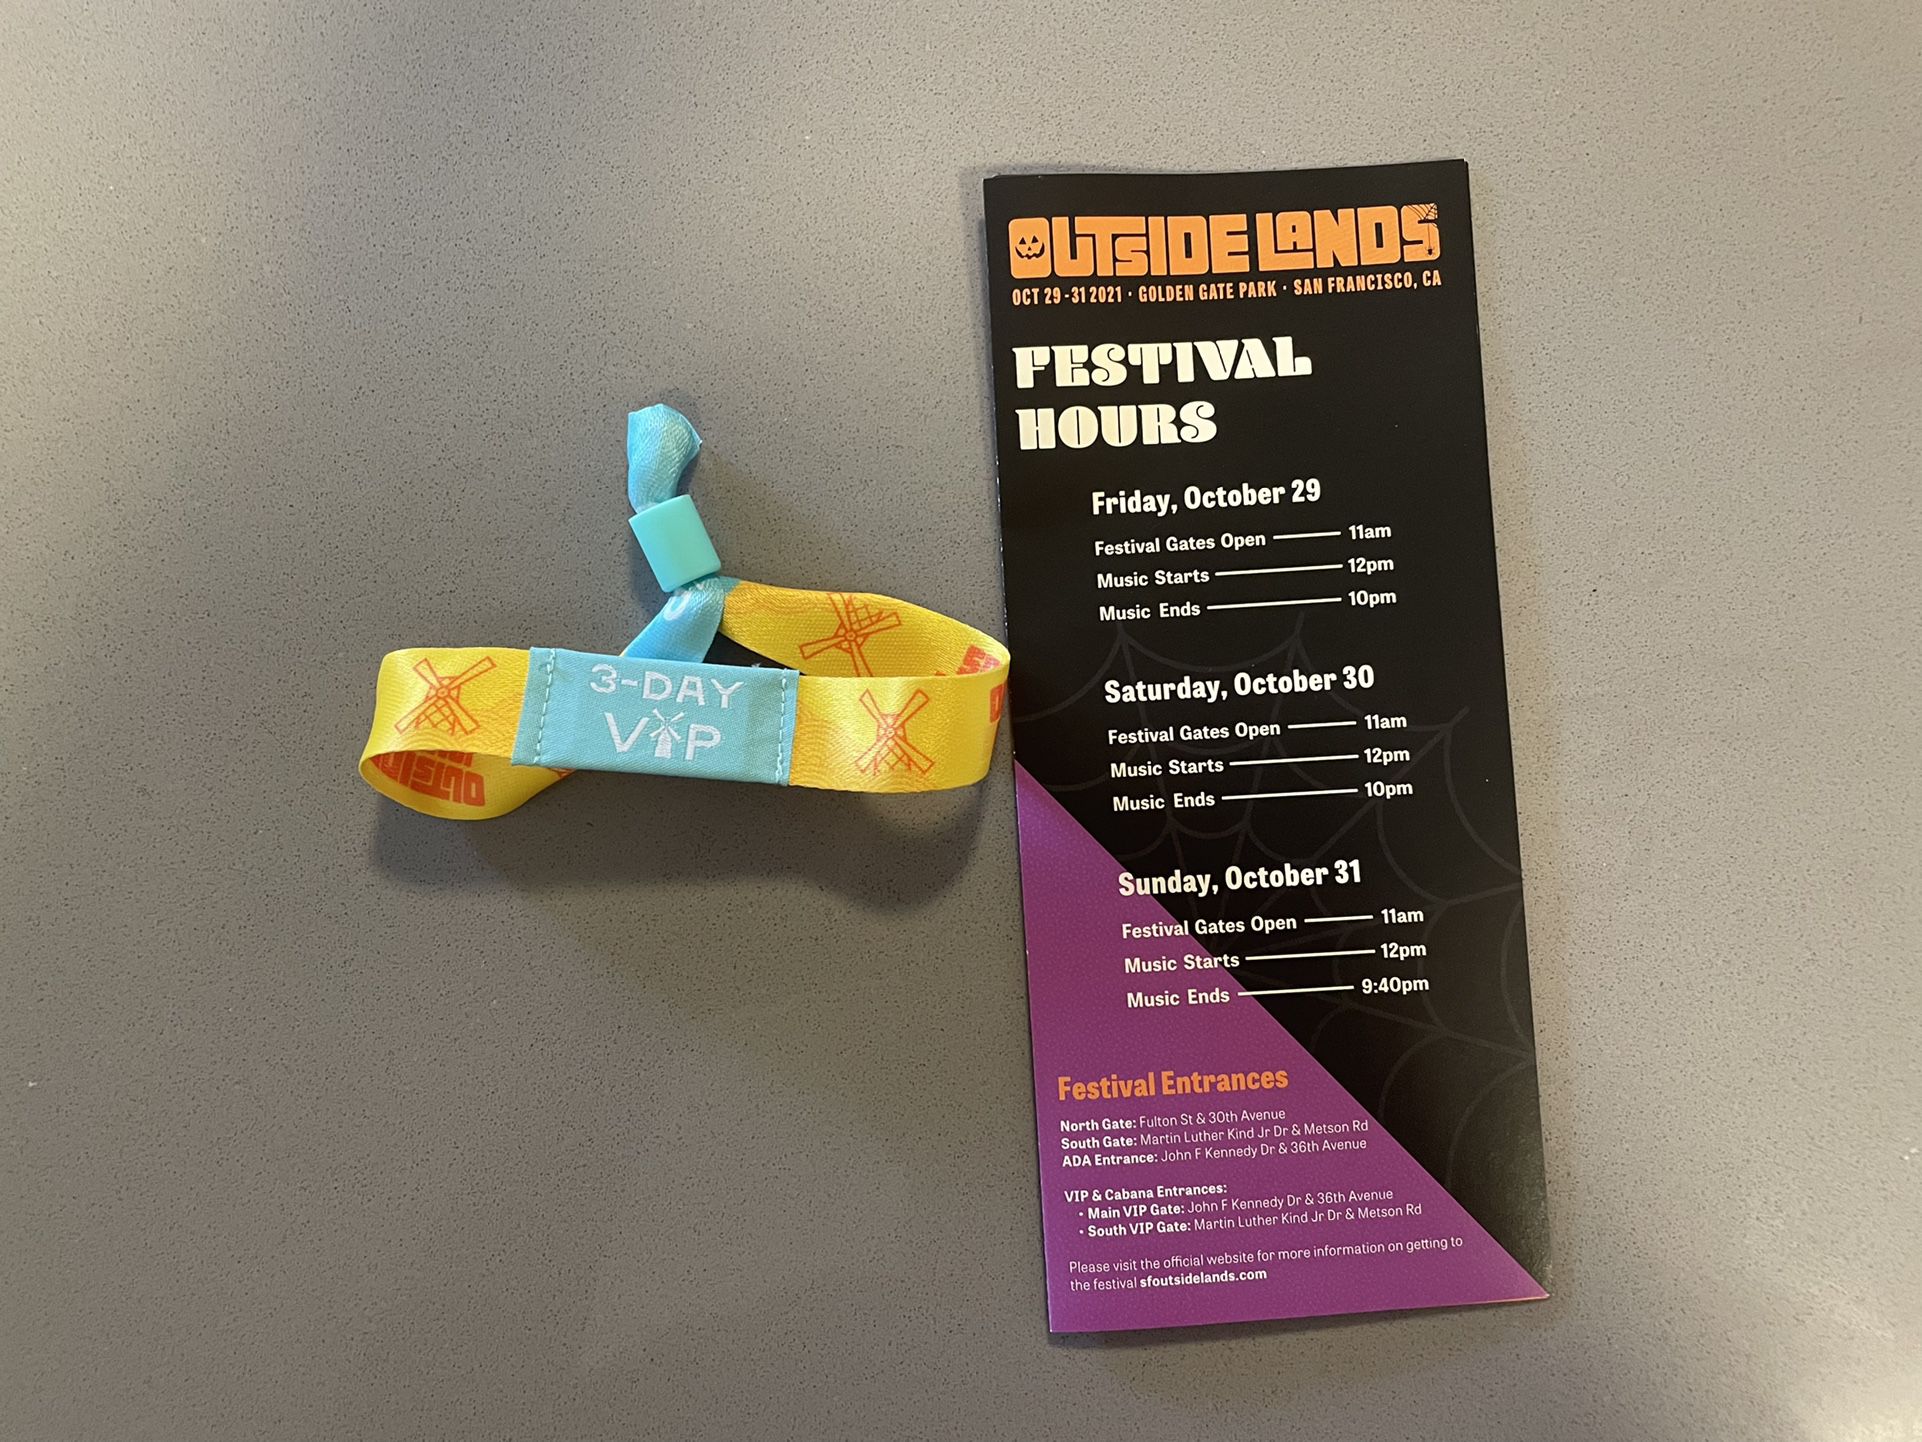 3-Day VIP Outside Lands Ticket/Wristband